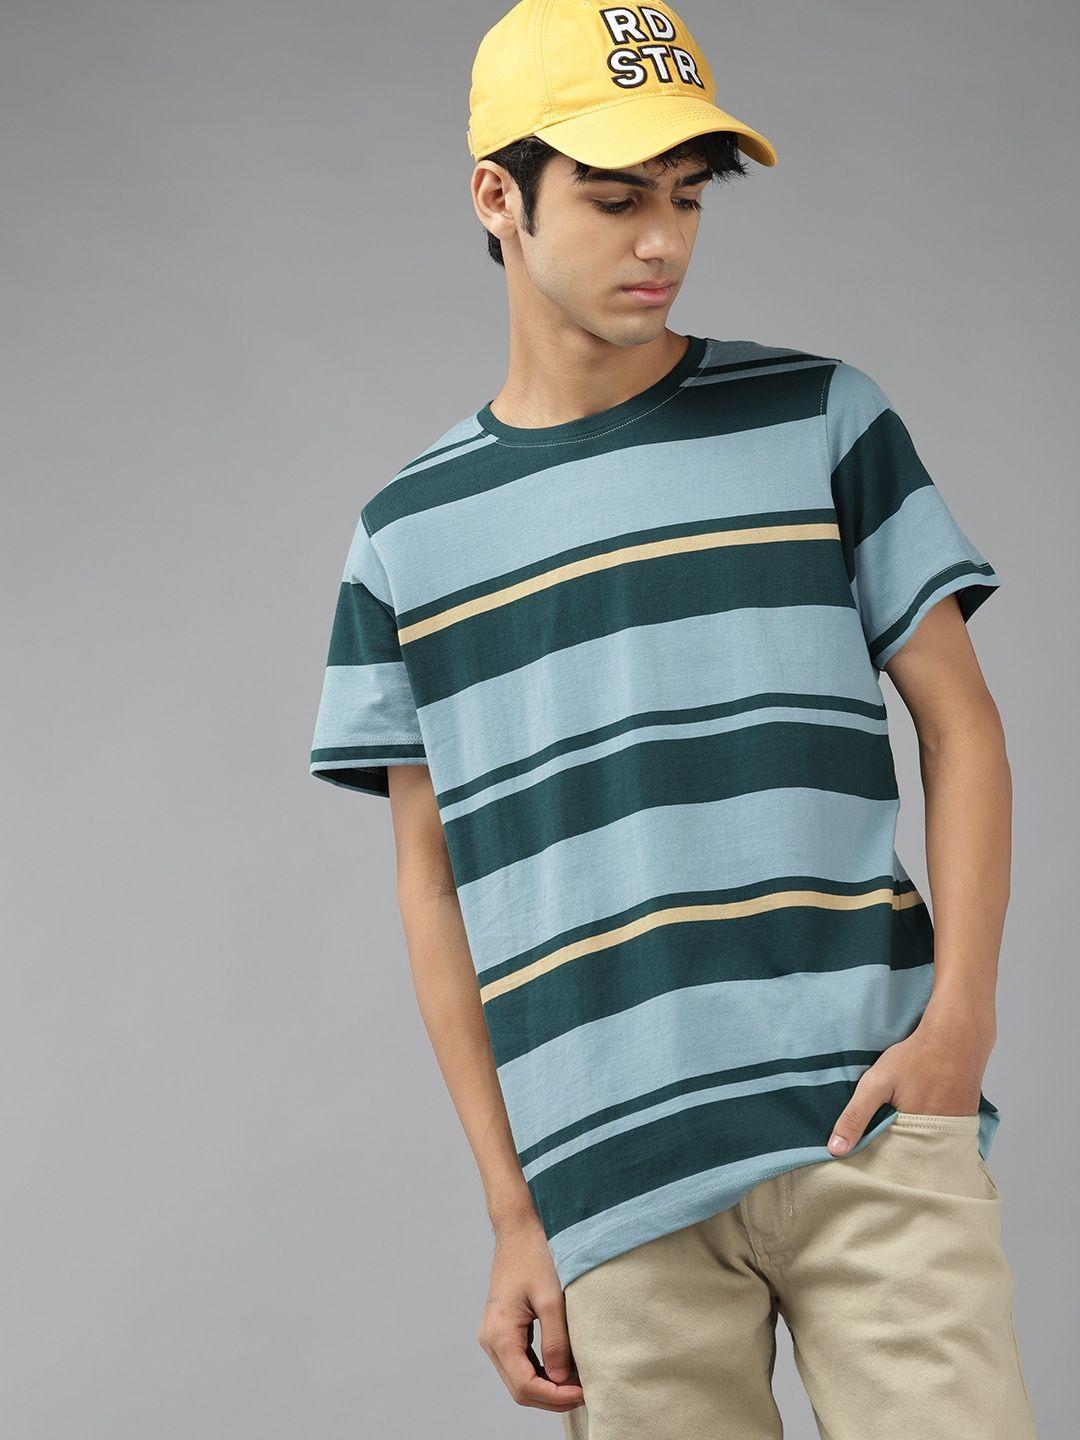 uth by roadster boys blue & green striped pure cotton t-shirt